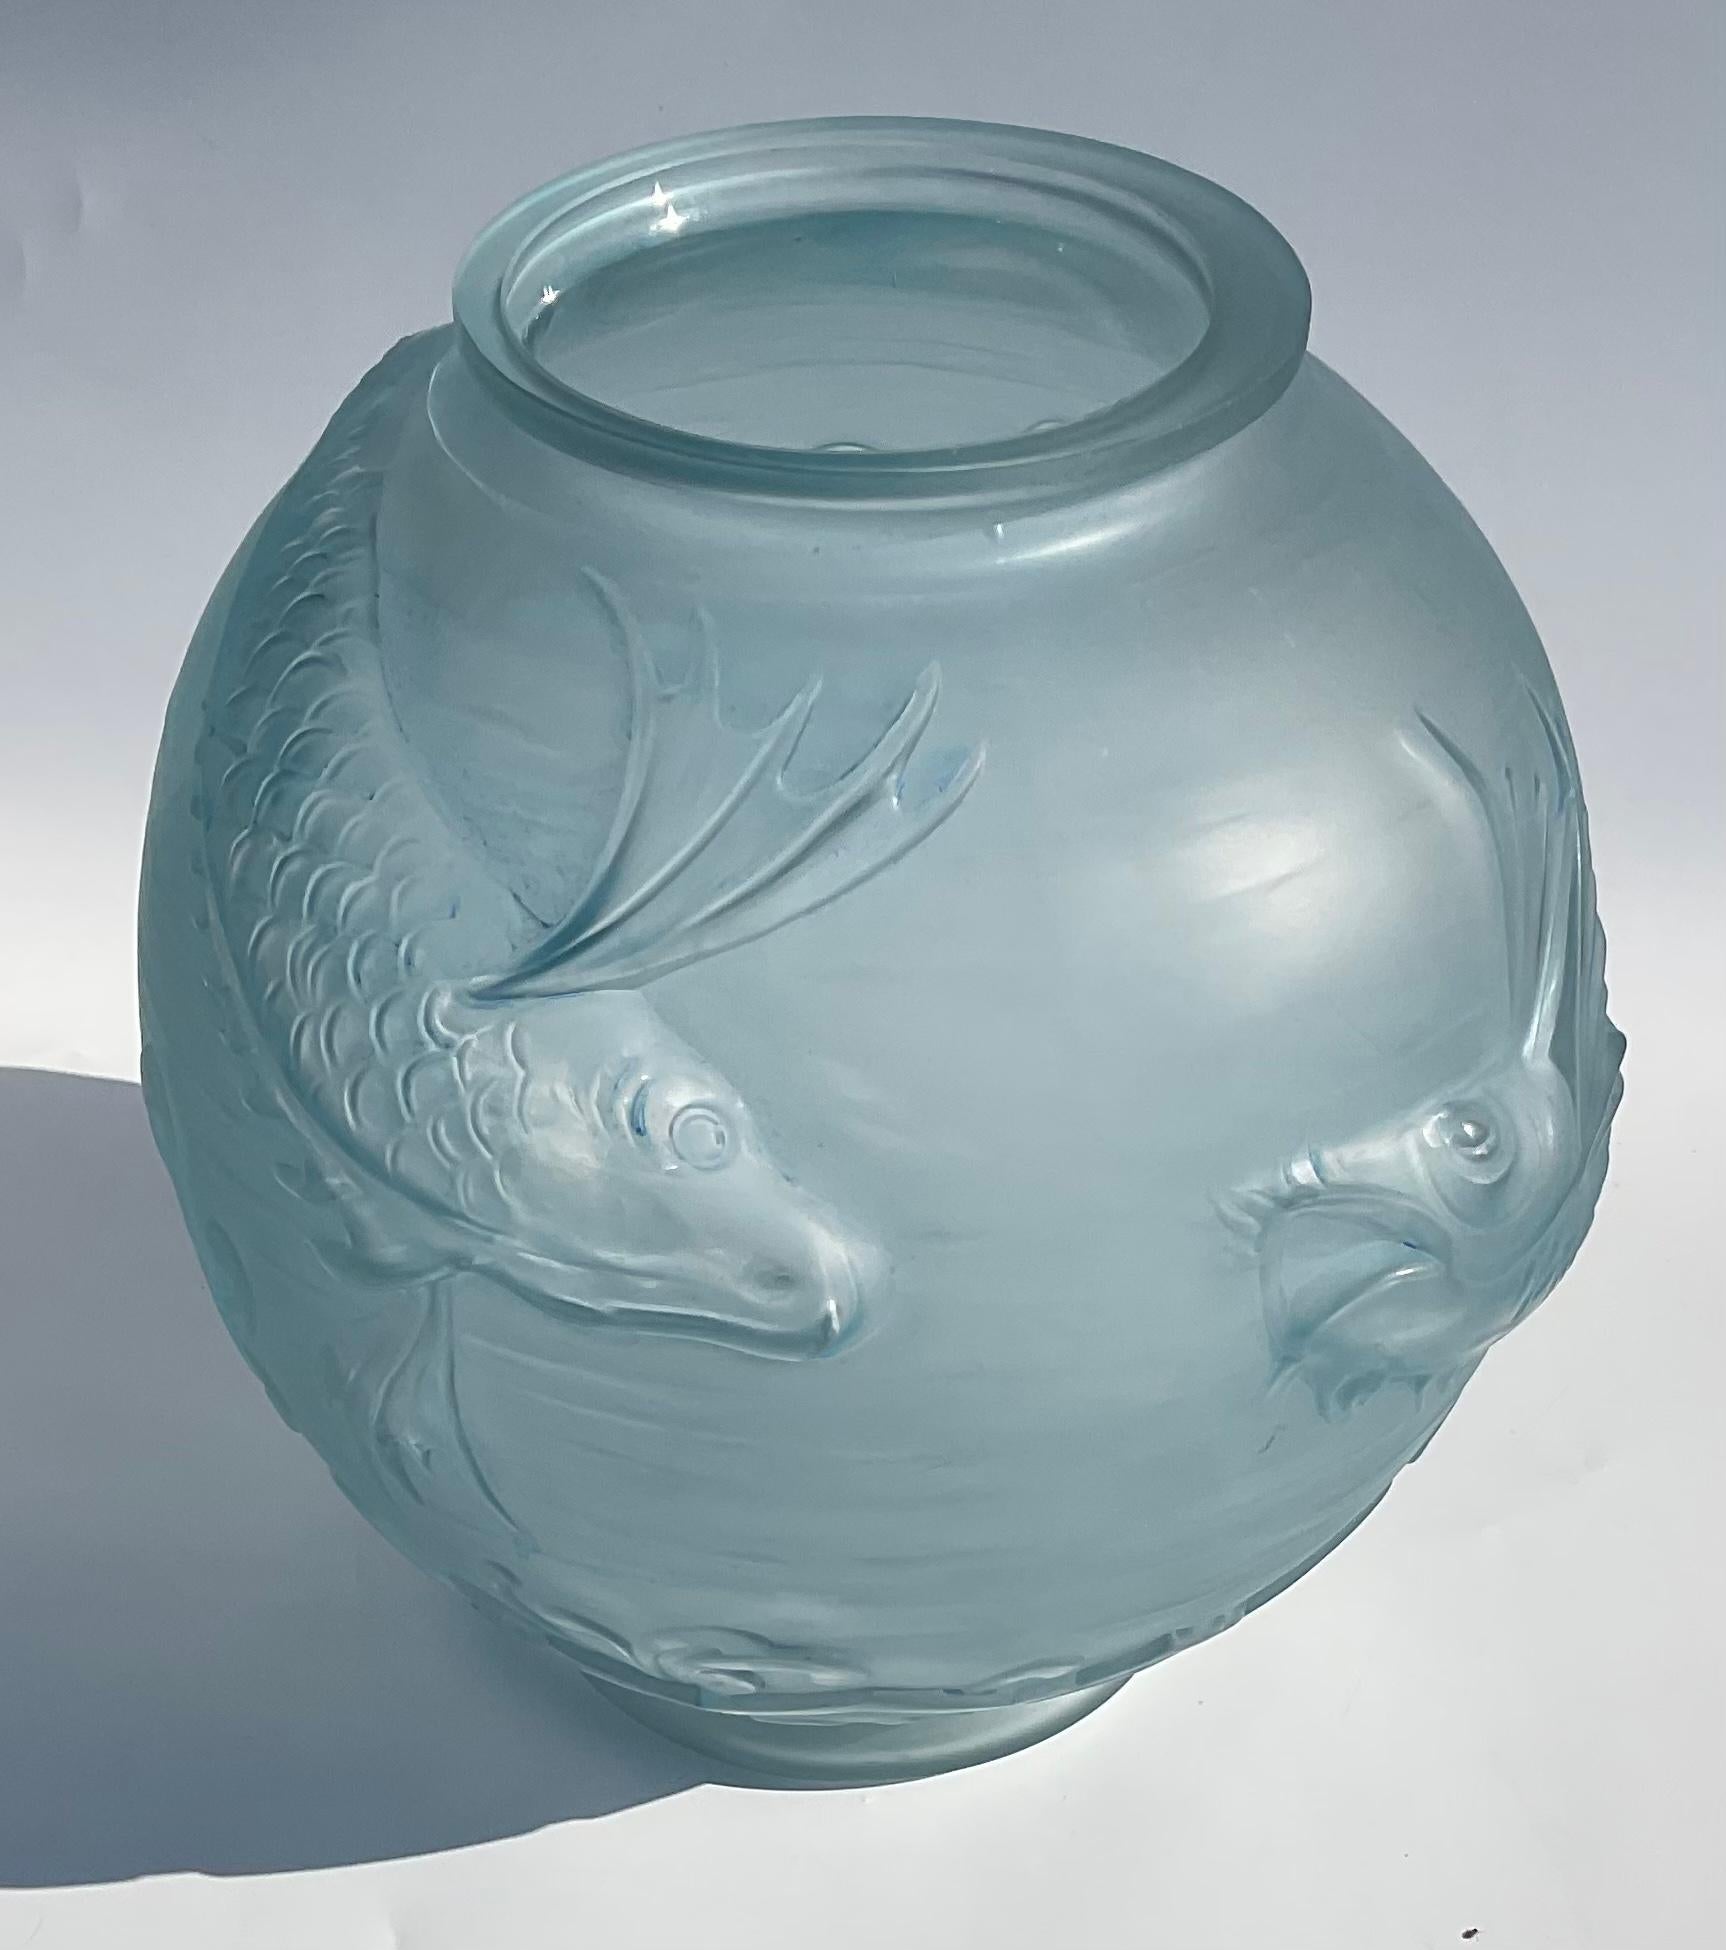 Large Pierre D’avesn Large French Art Deco Flying Fish Vase circa 1930s Blue In Good Condition For Sale In Ann Arbor, MI